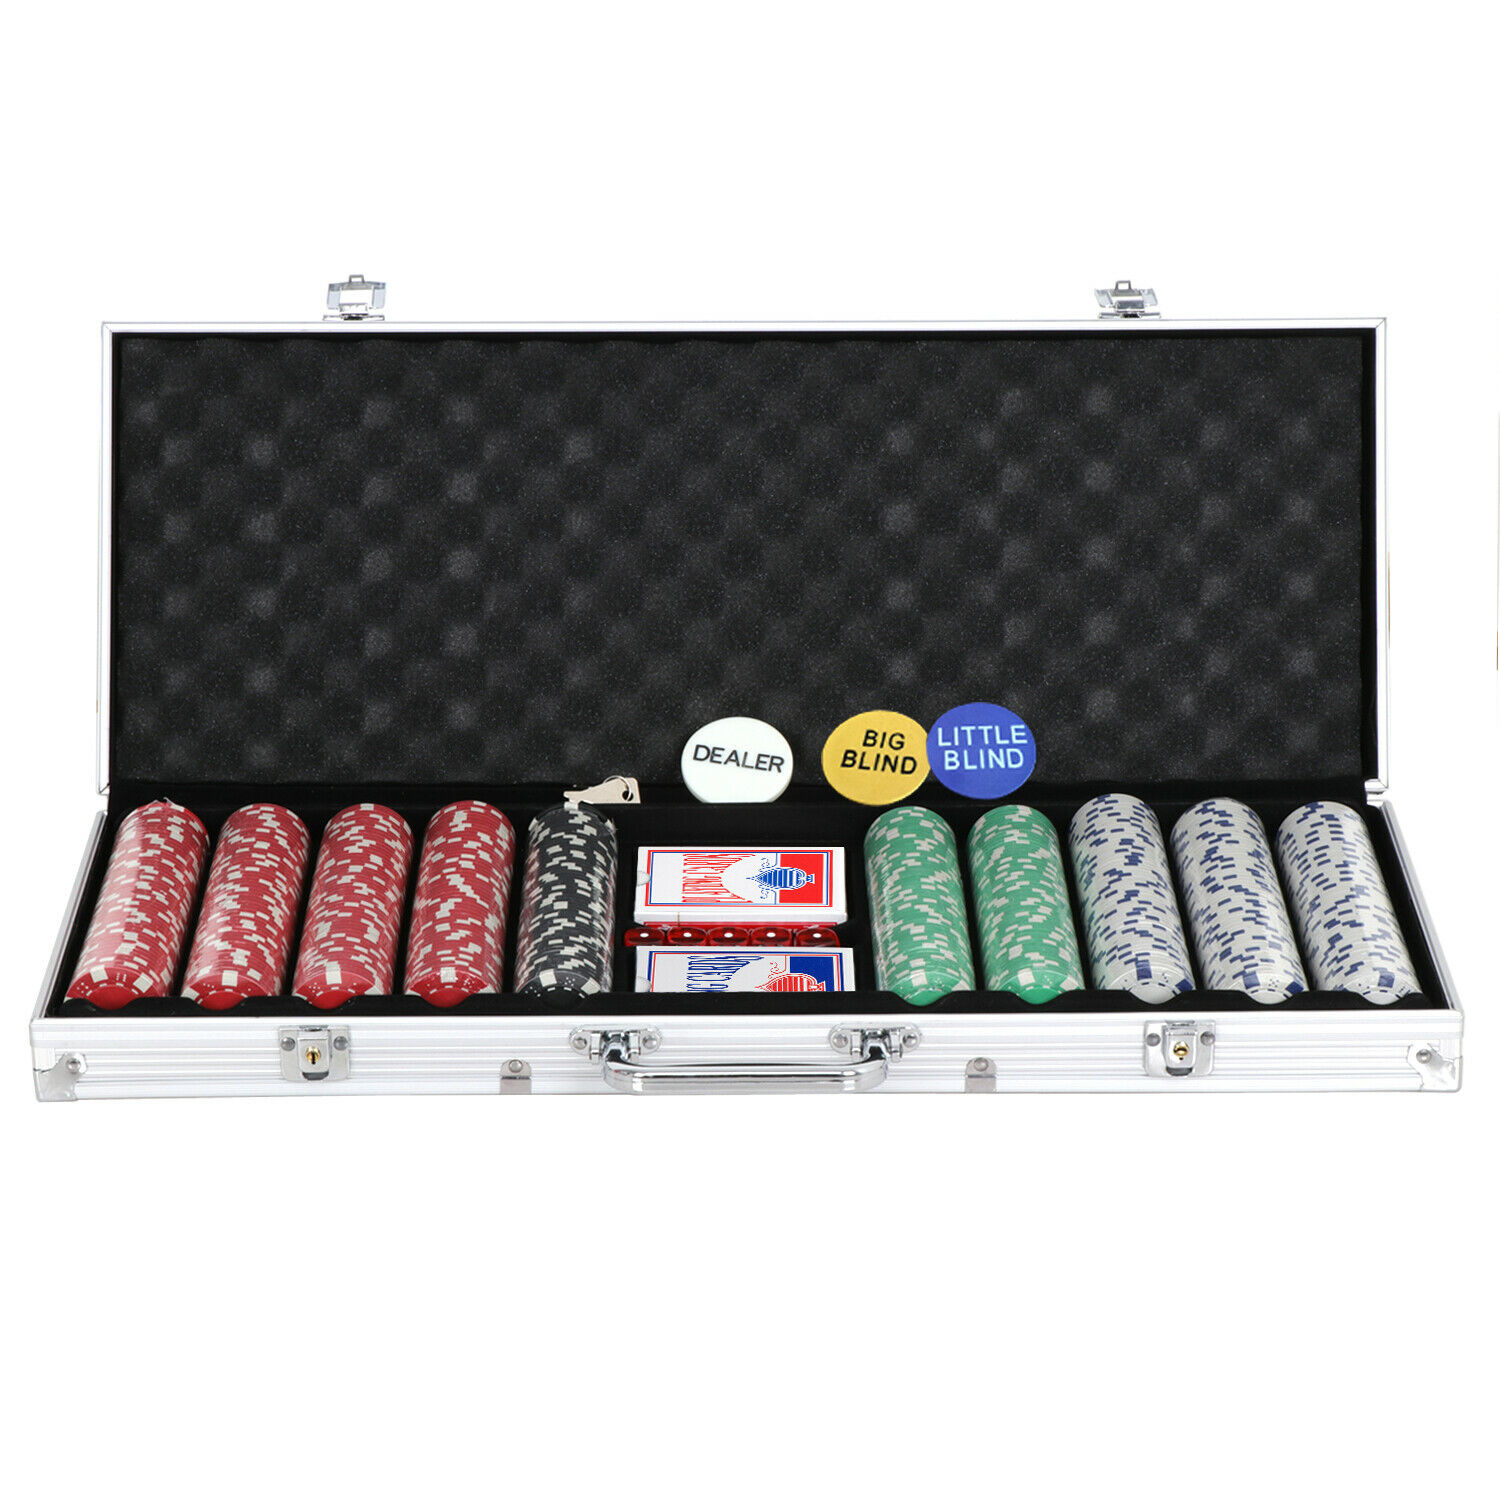 ZENY 500 Poker Chip Set 11.5 Gram Dice Style Aluminum Case, Cards, Dices, Blind Button - image 1 of 6